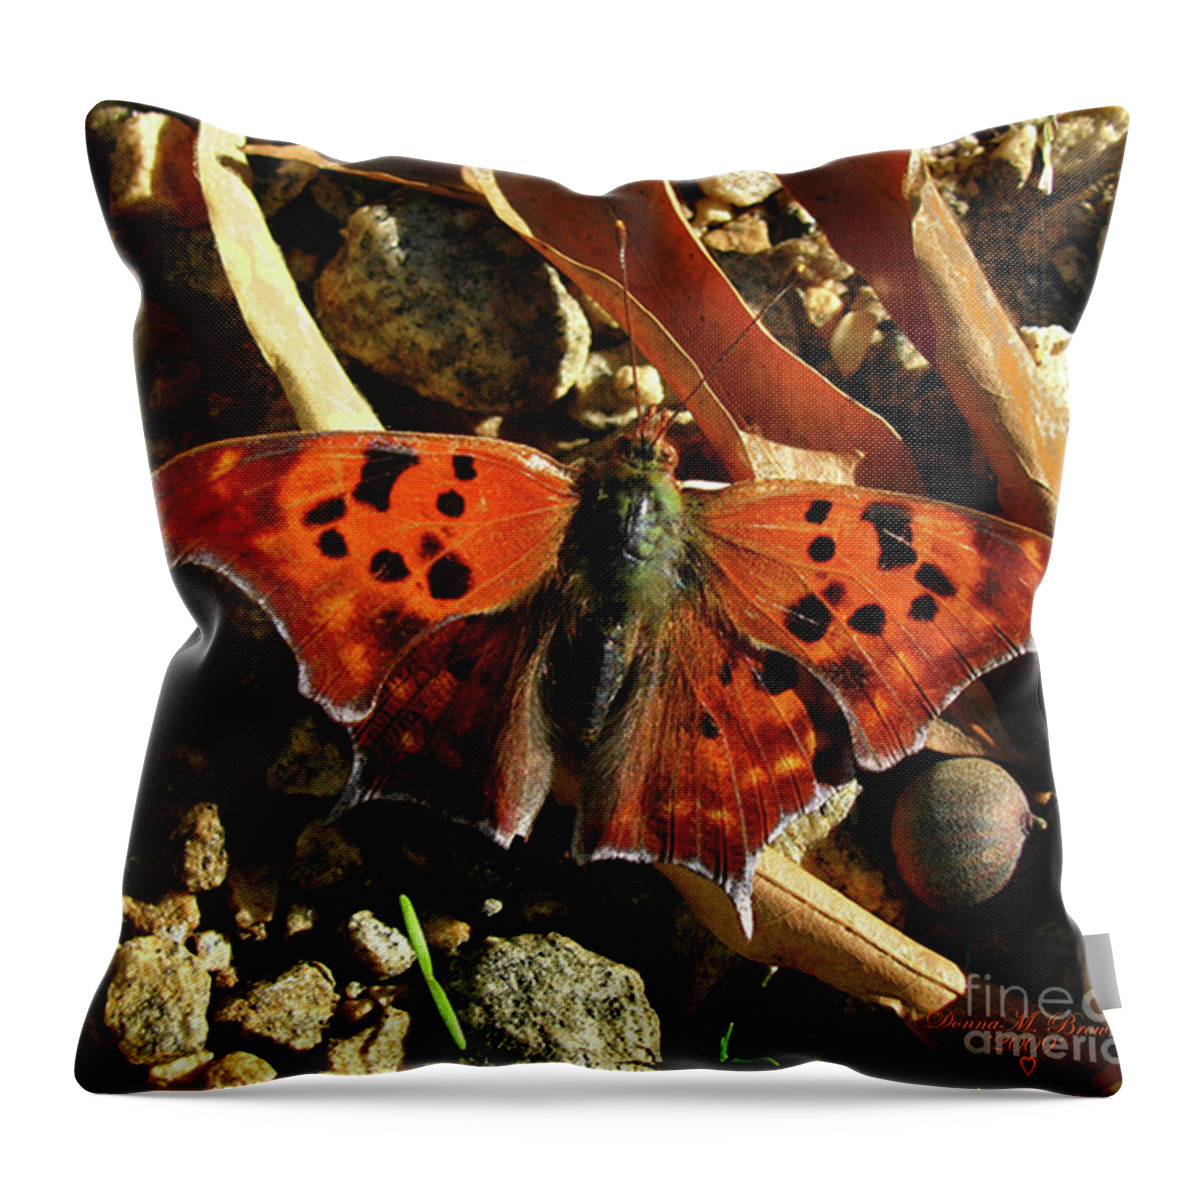 Butterfly Throw Pillow featuring the photograph Question Mark Butterfly by Donna Brown